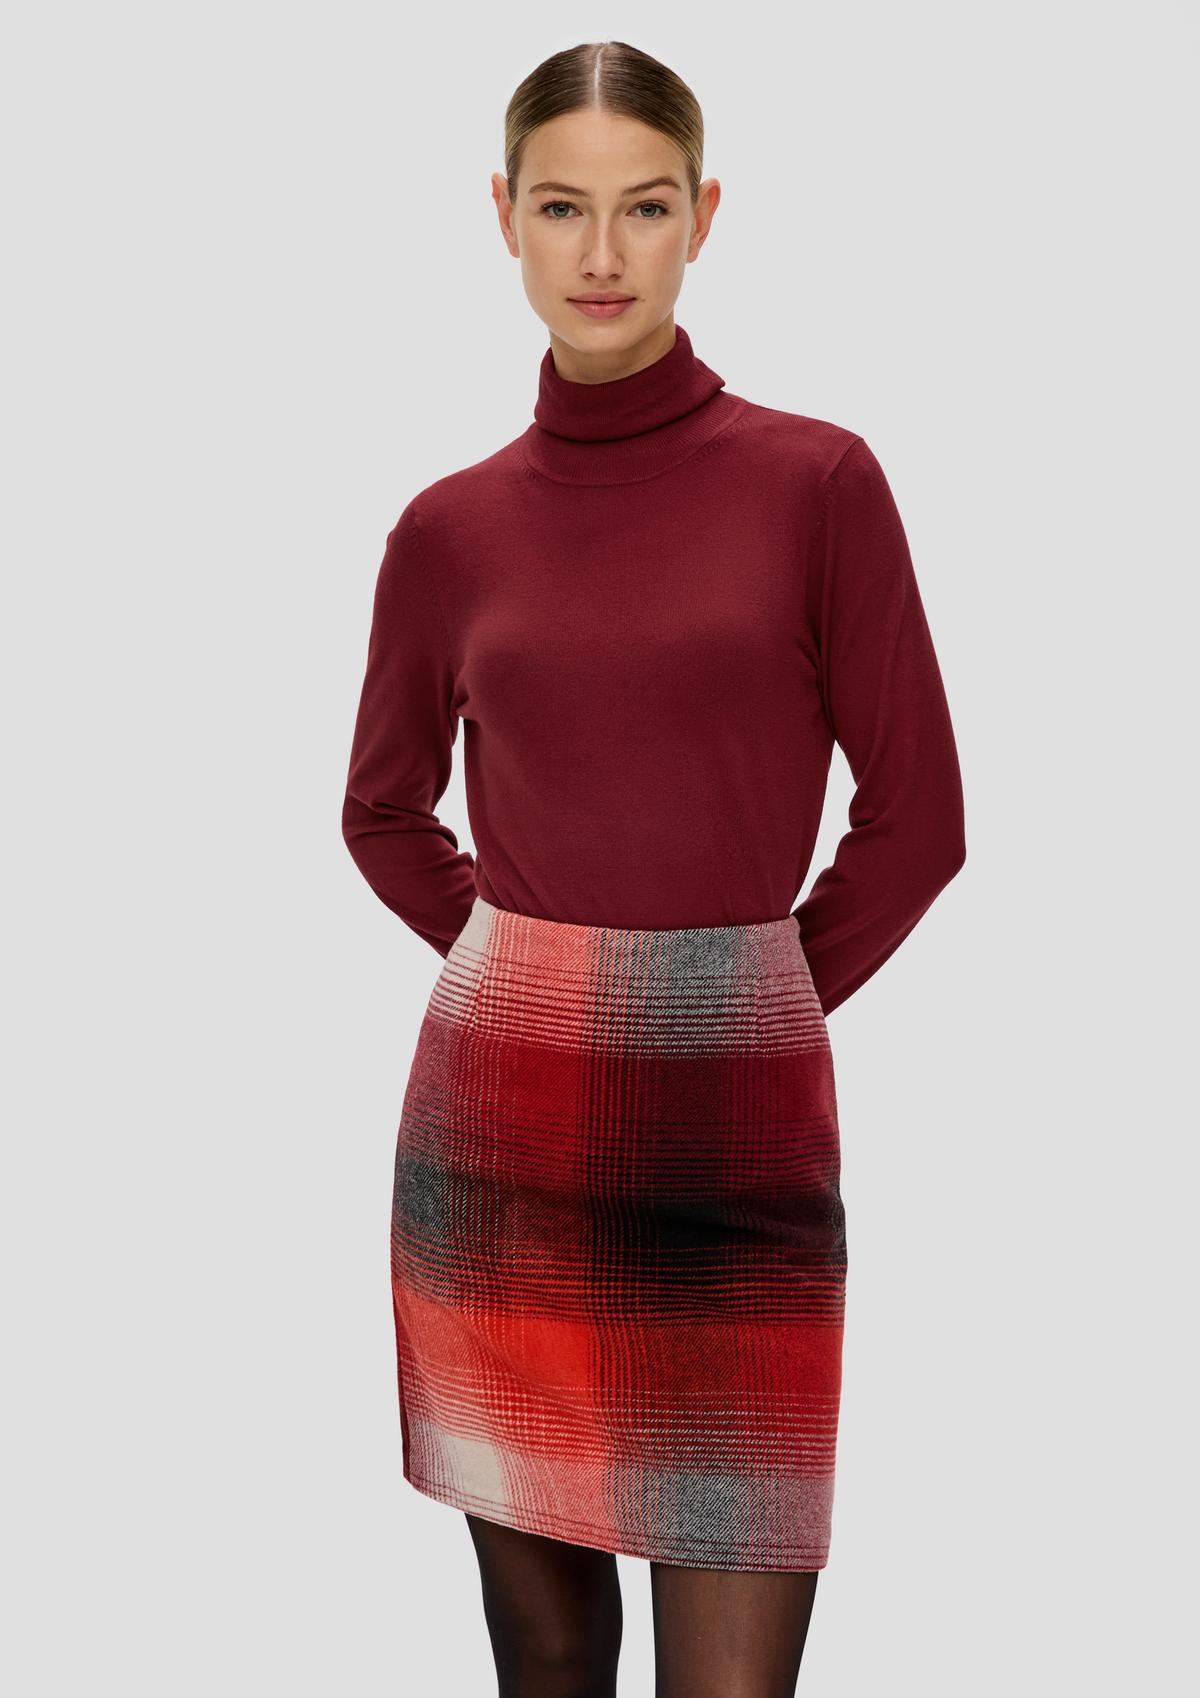 Knit jumper with a polo neck